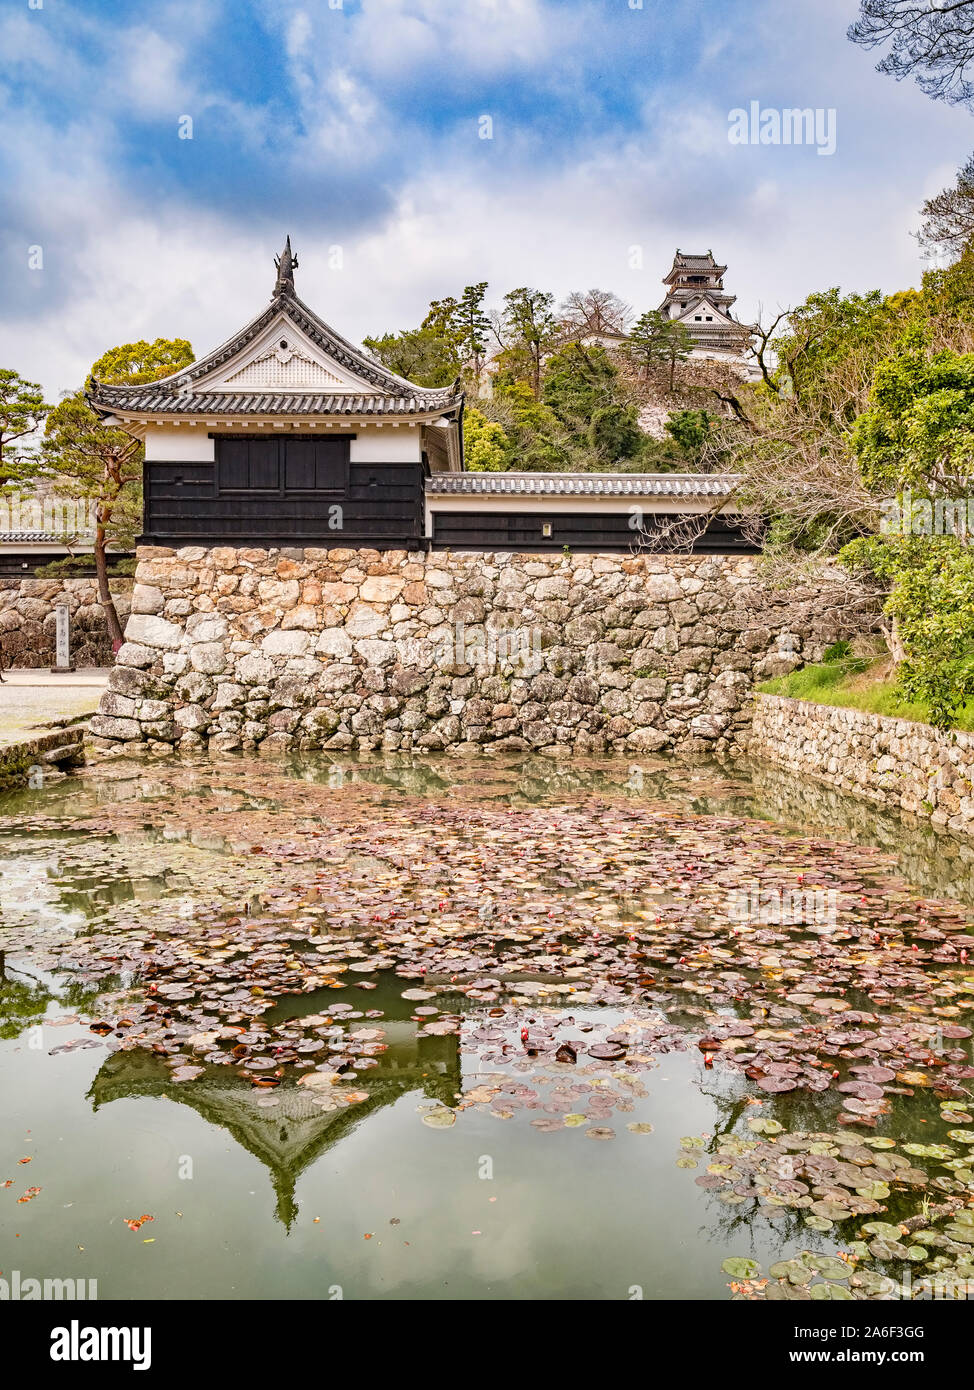 Moat and gatehouse of Kochi Castle, Japan, with the main keep behind. Stock Photo